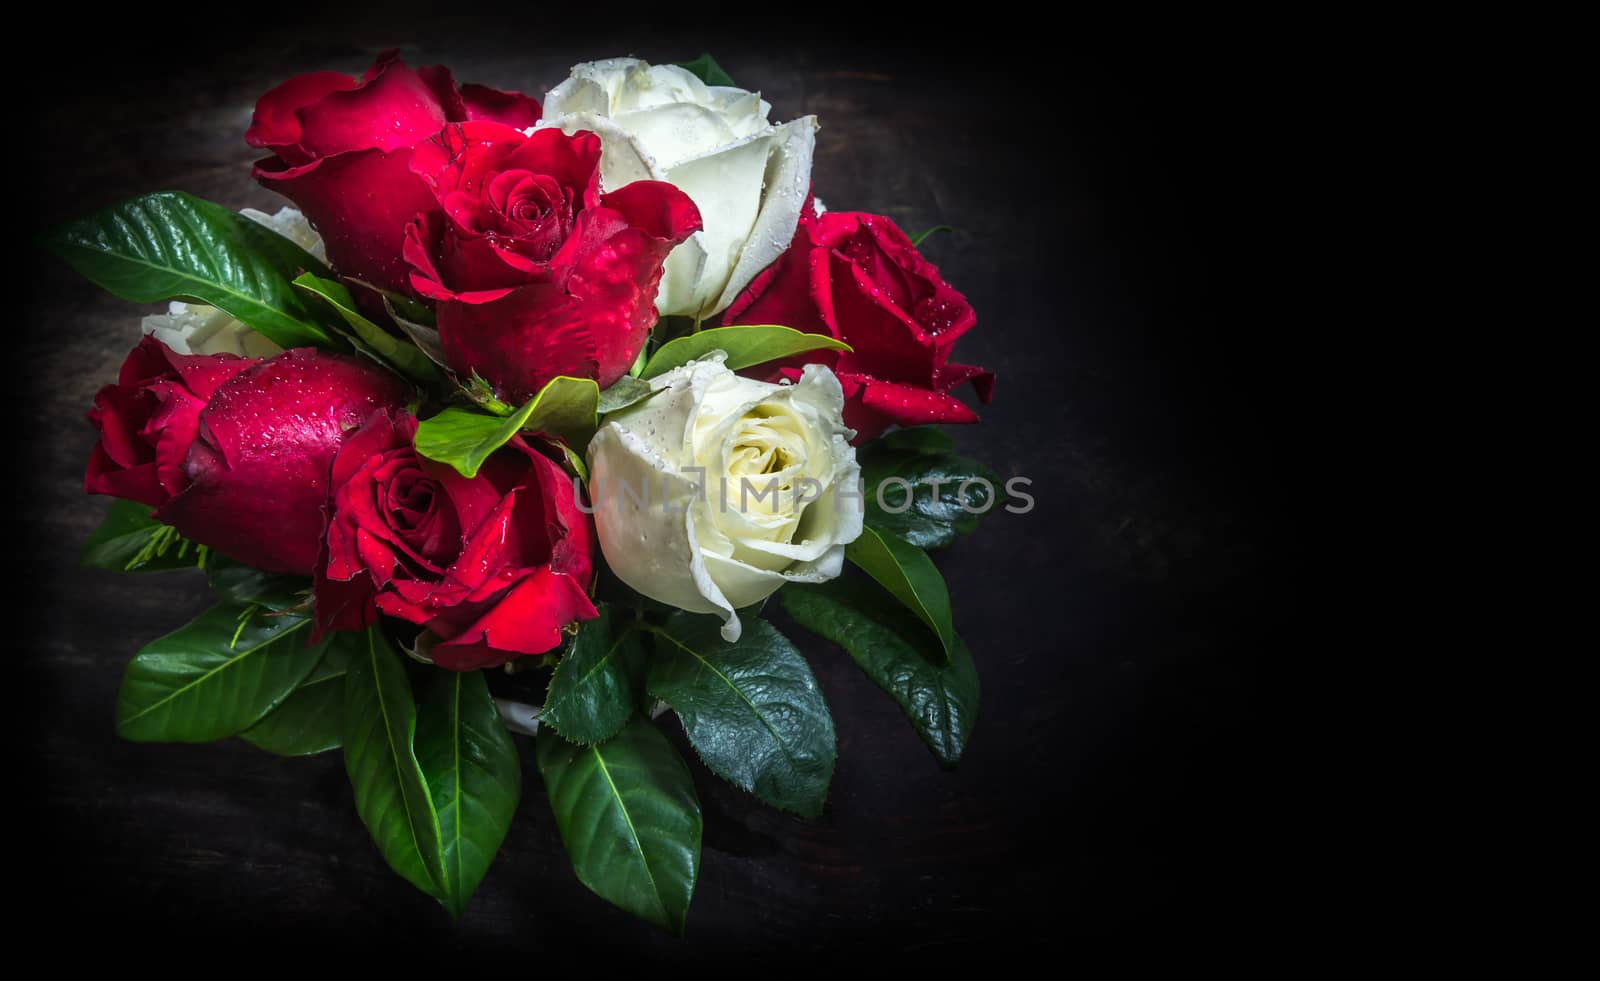 red and white rose with various leaves